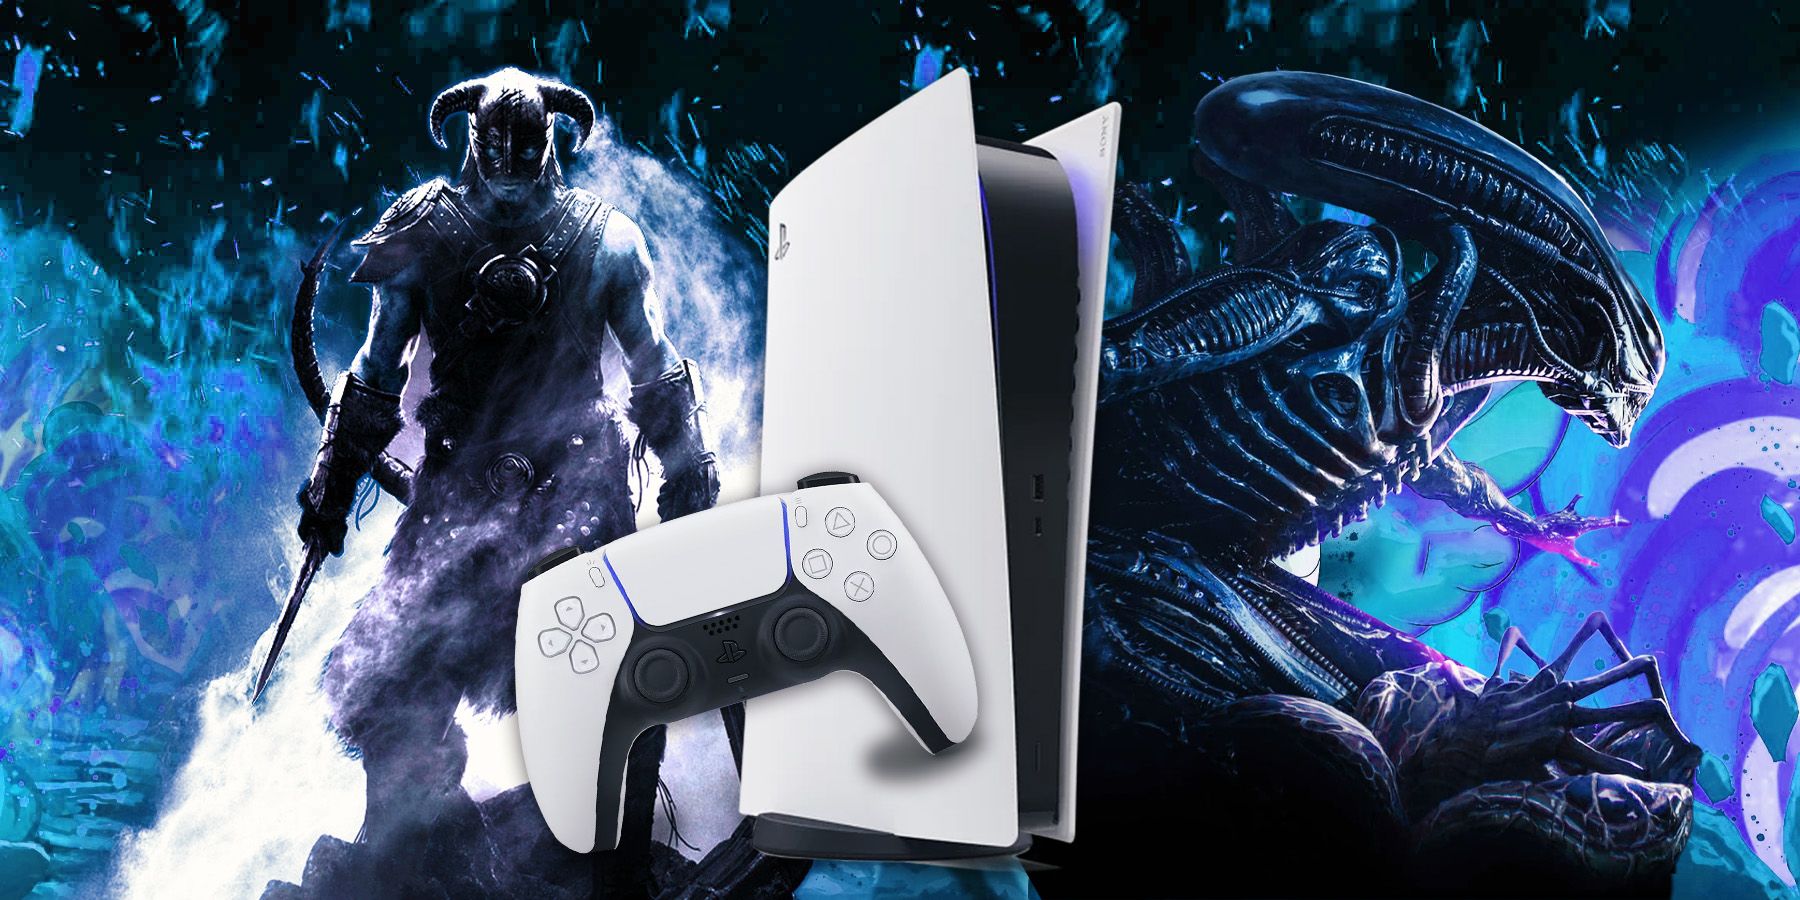 A PS5 in front of the Dragonborn from Skyrim and the xenomorph from Alien.